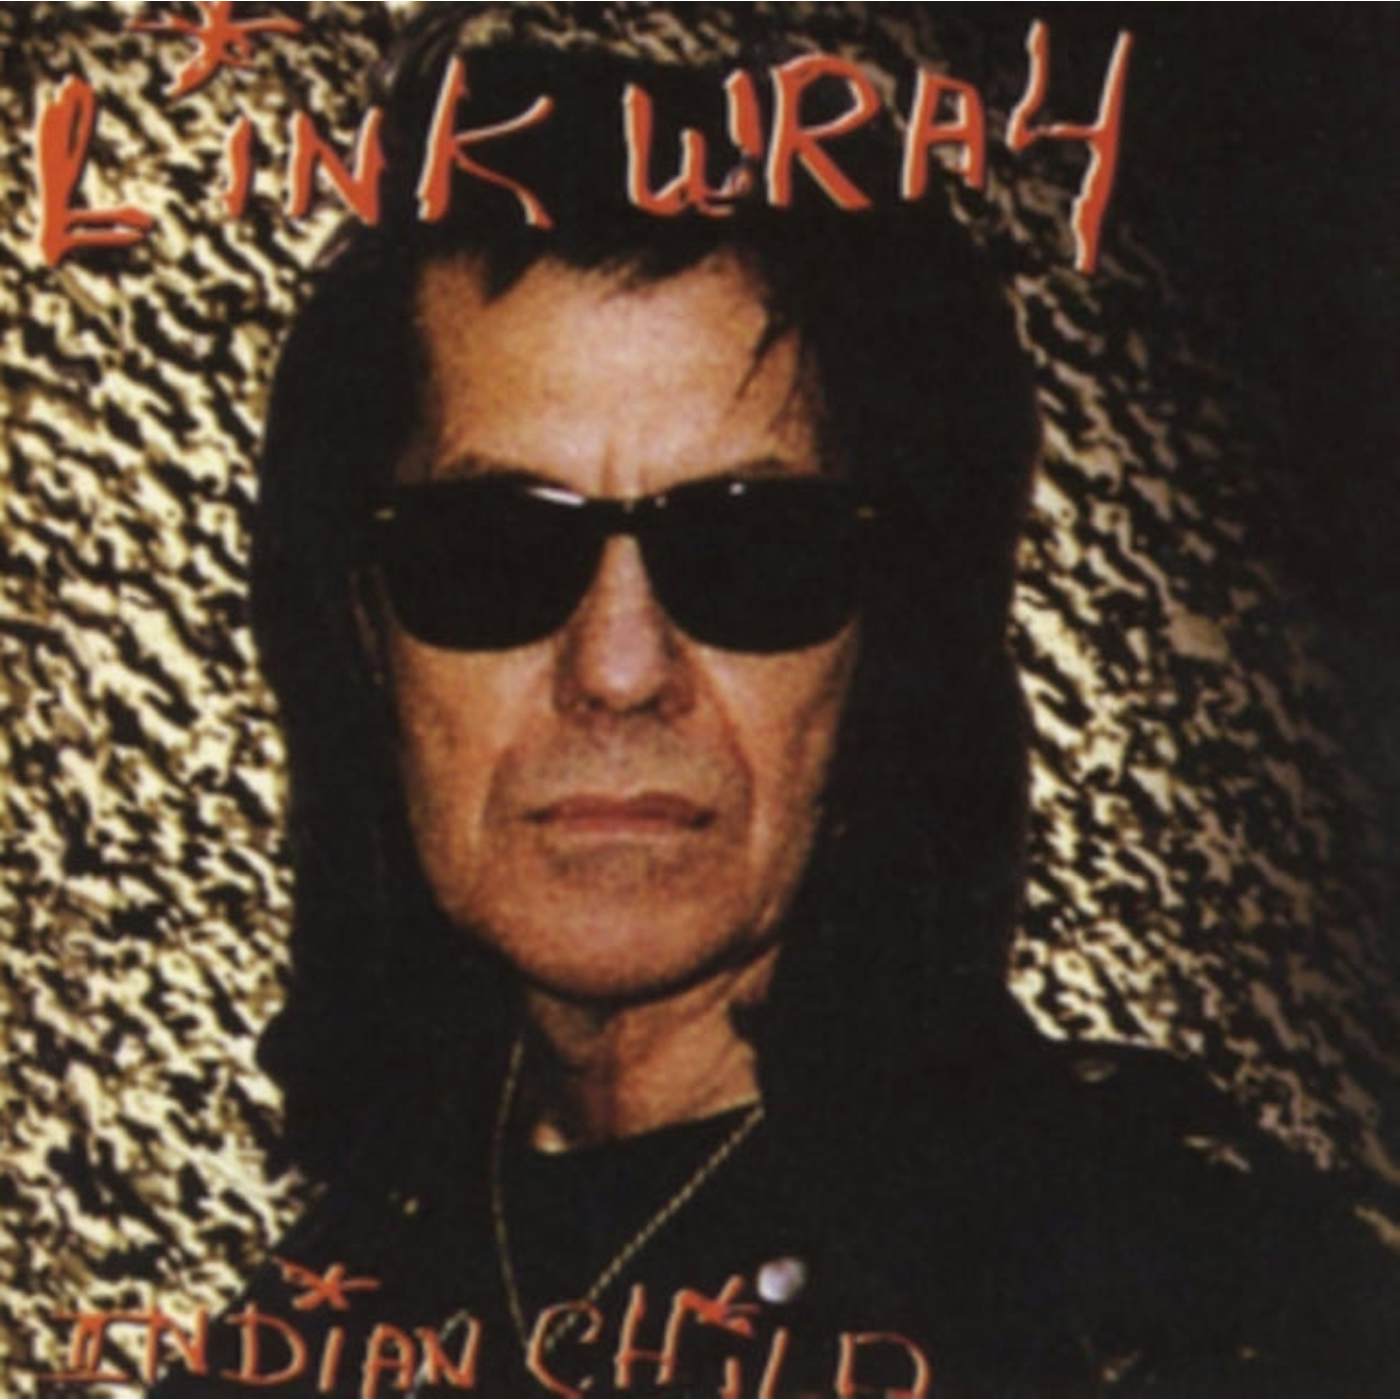 Link Wray CD - Indian Child